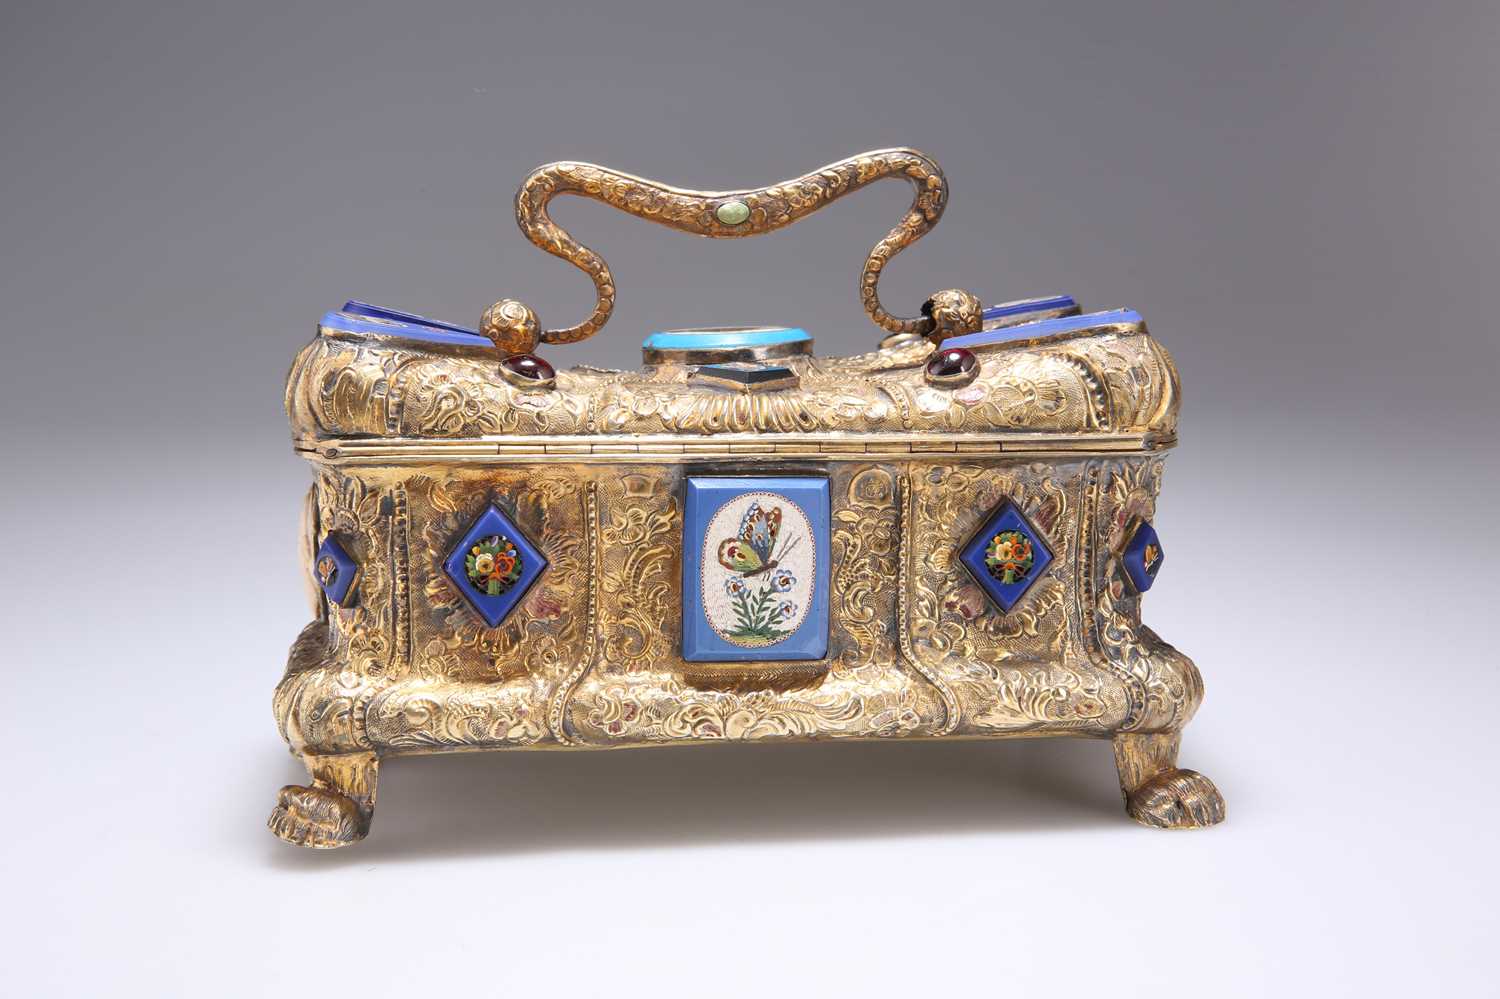 A RARE VIENNESE SILVER-GILT CASKET MOUNTED WITH CAMEOS, MICROMOSAICS AND 'JEWELS' - Image 2 of 5